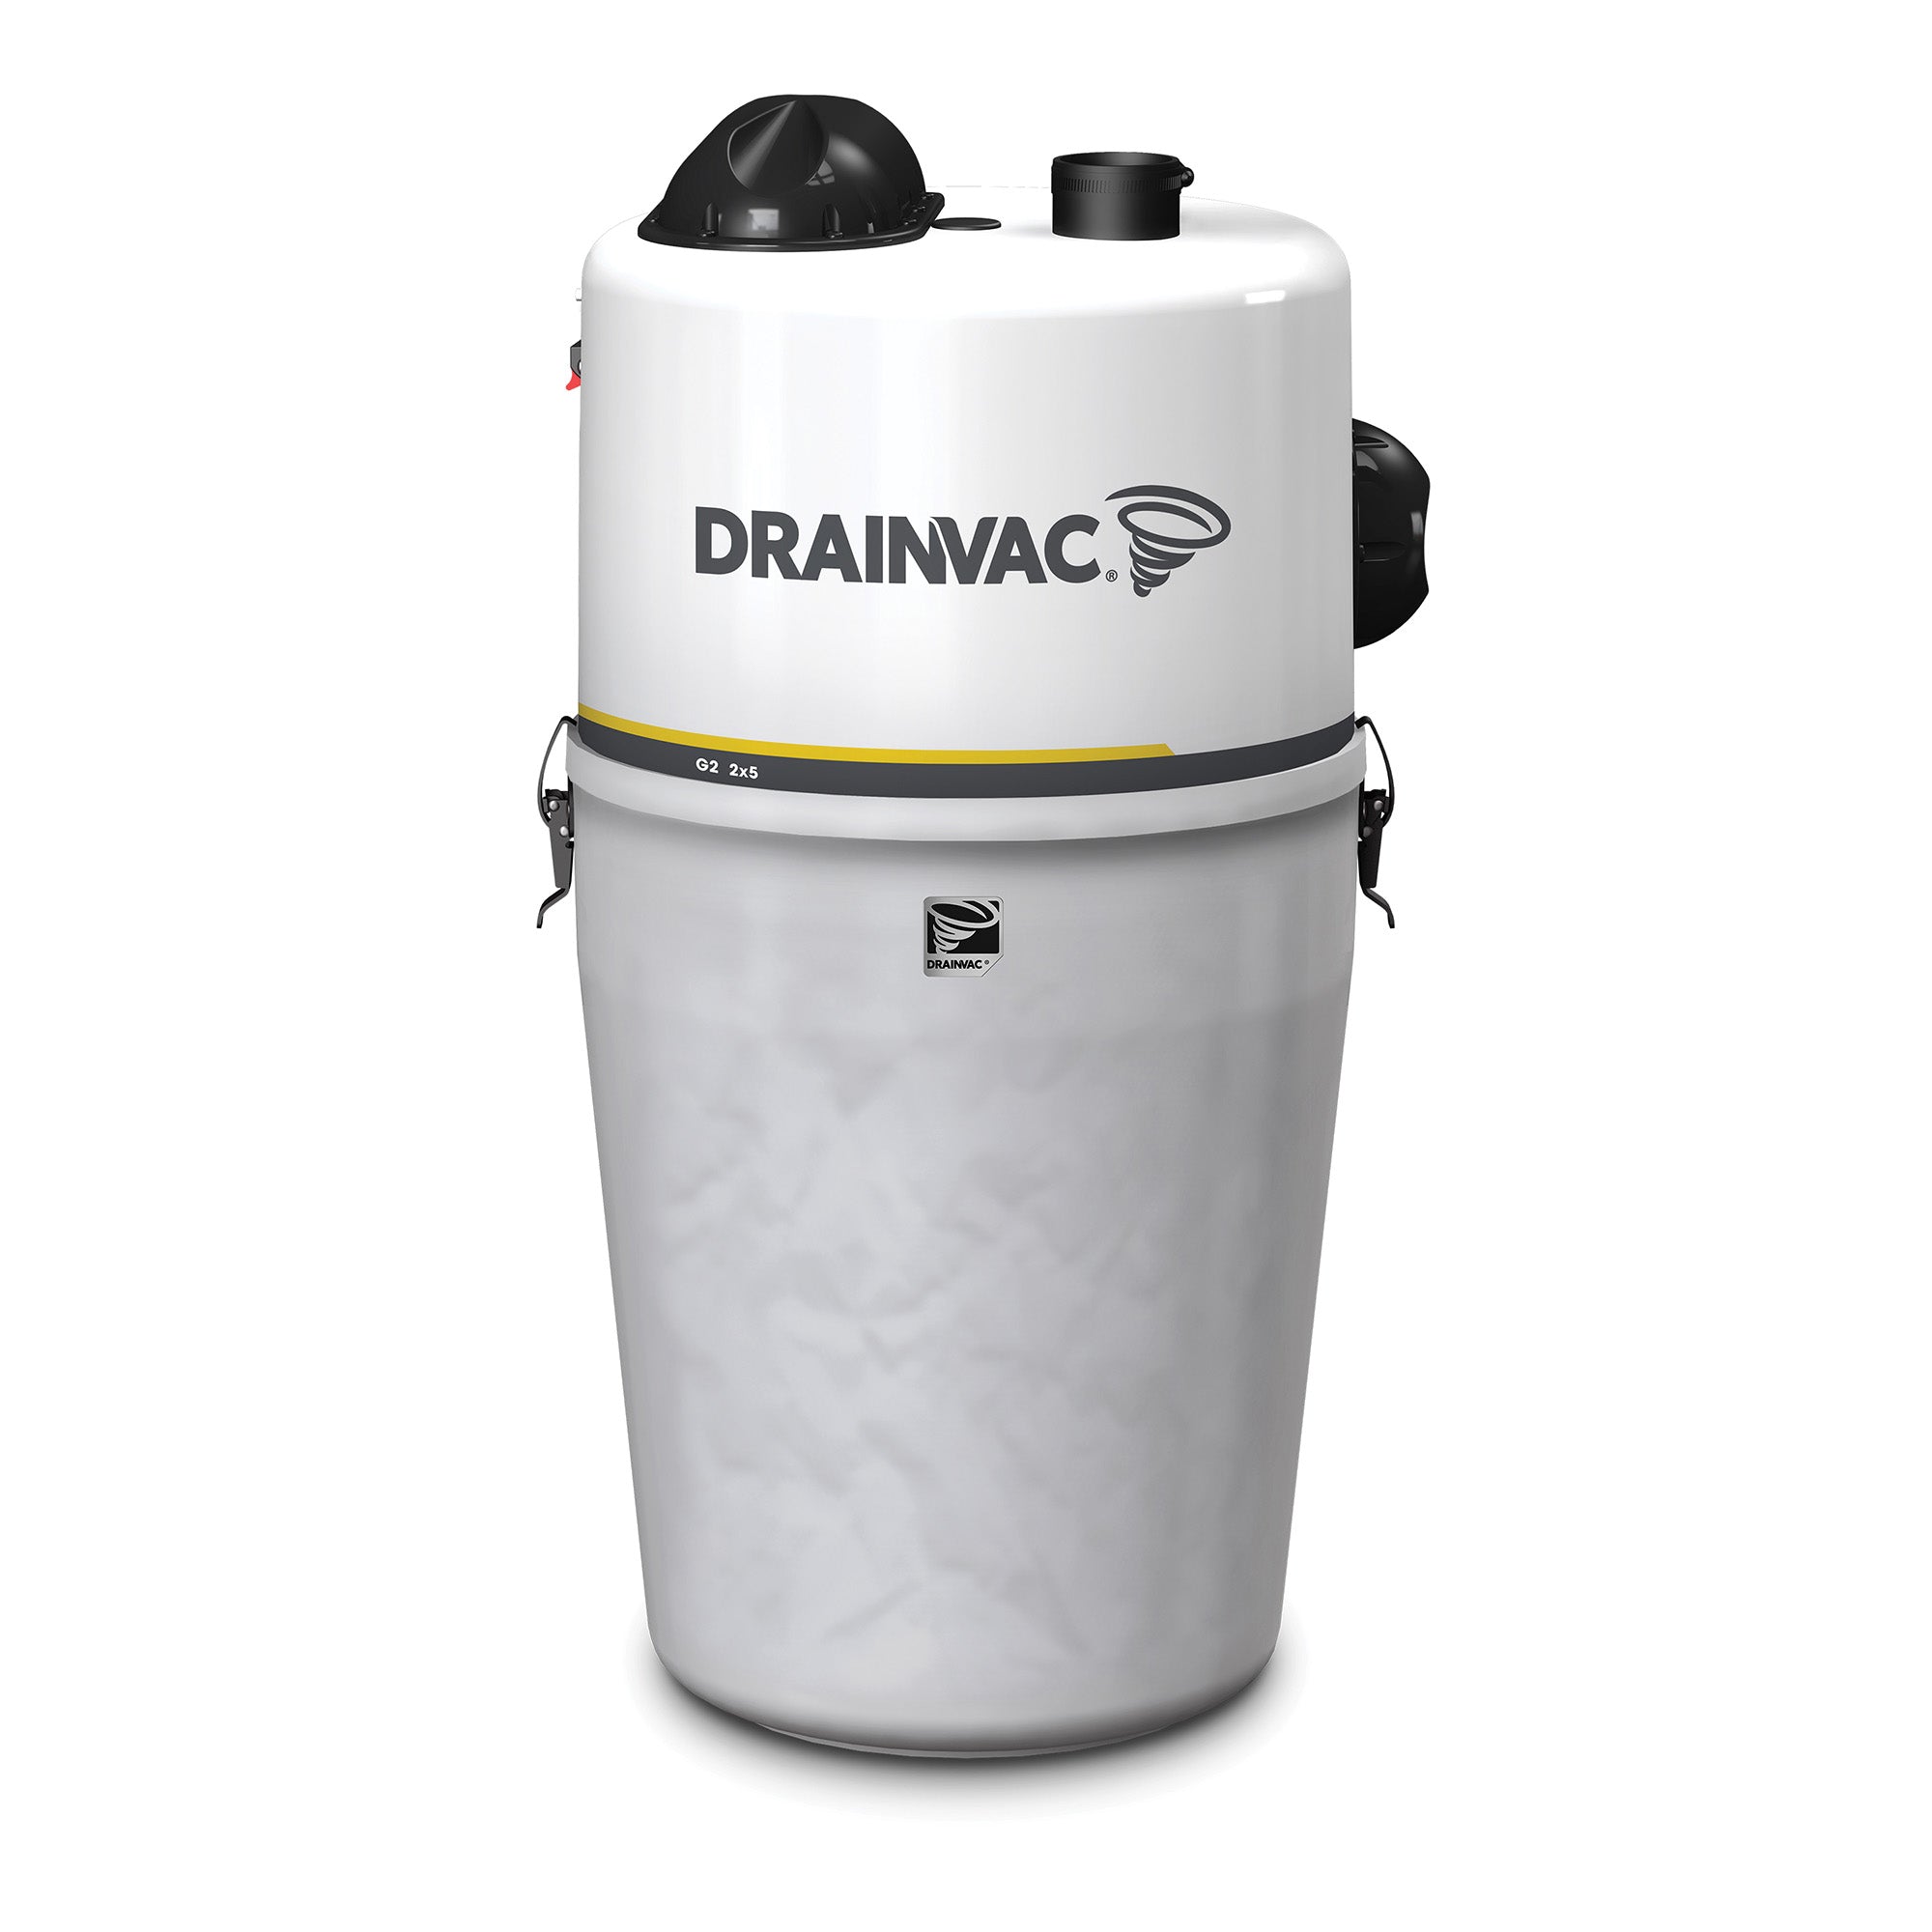 DrainVac Generation 2 Central Vacuum | 2 Motor, 520 Air Watts with Muffler and Outside Exhaust Vent